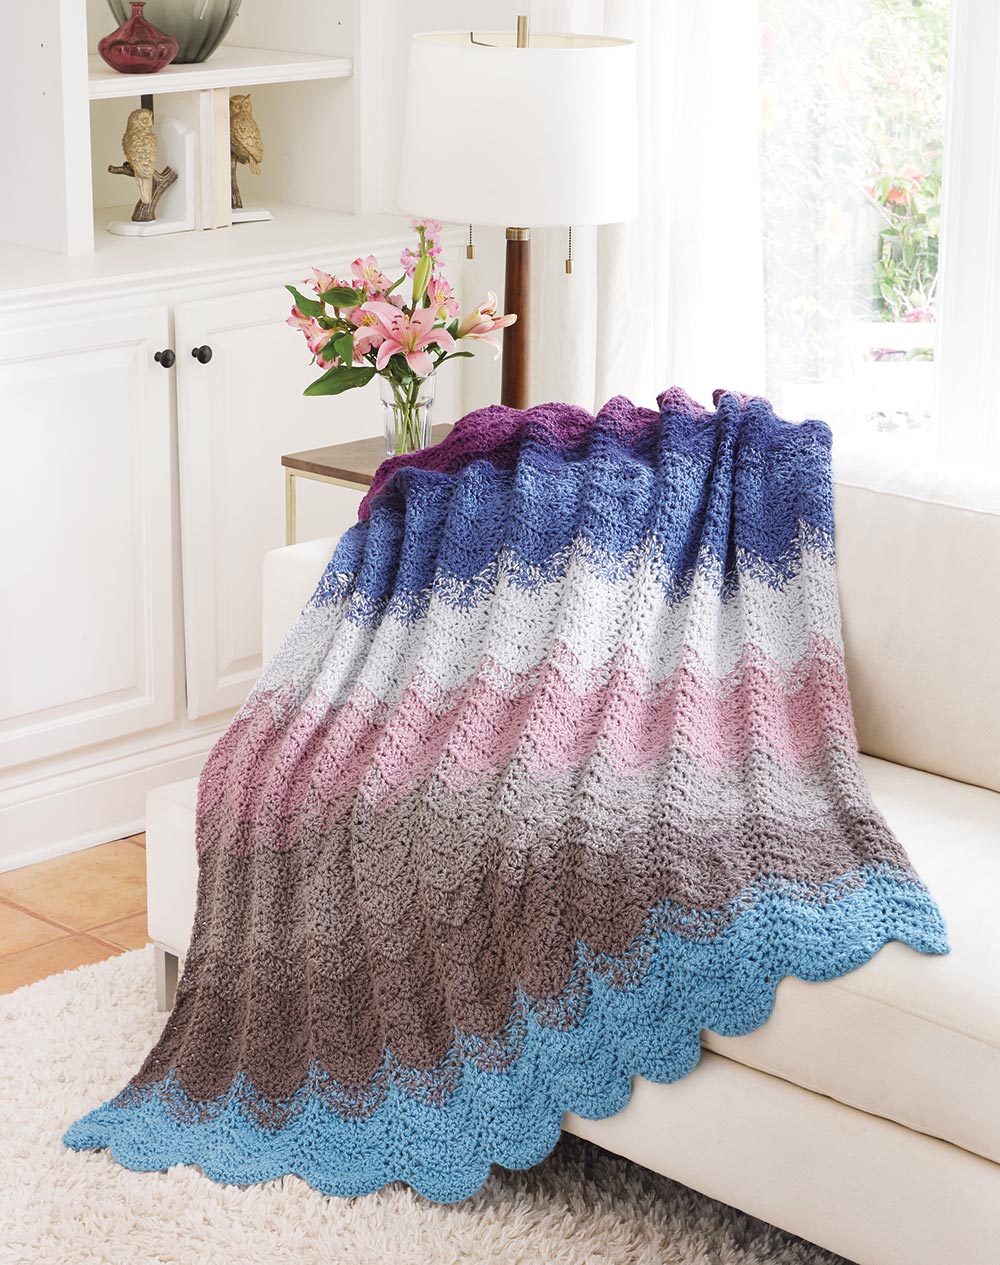 Timeless Classics to Crochet - Vintage Crochet Afghans Chevron, Granny, Floral, Plaid, Shells and Squares: 8 Classic Afghan Patterns to Crochet with Scrap Yarn